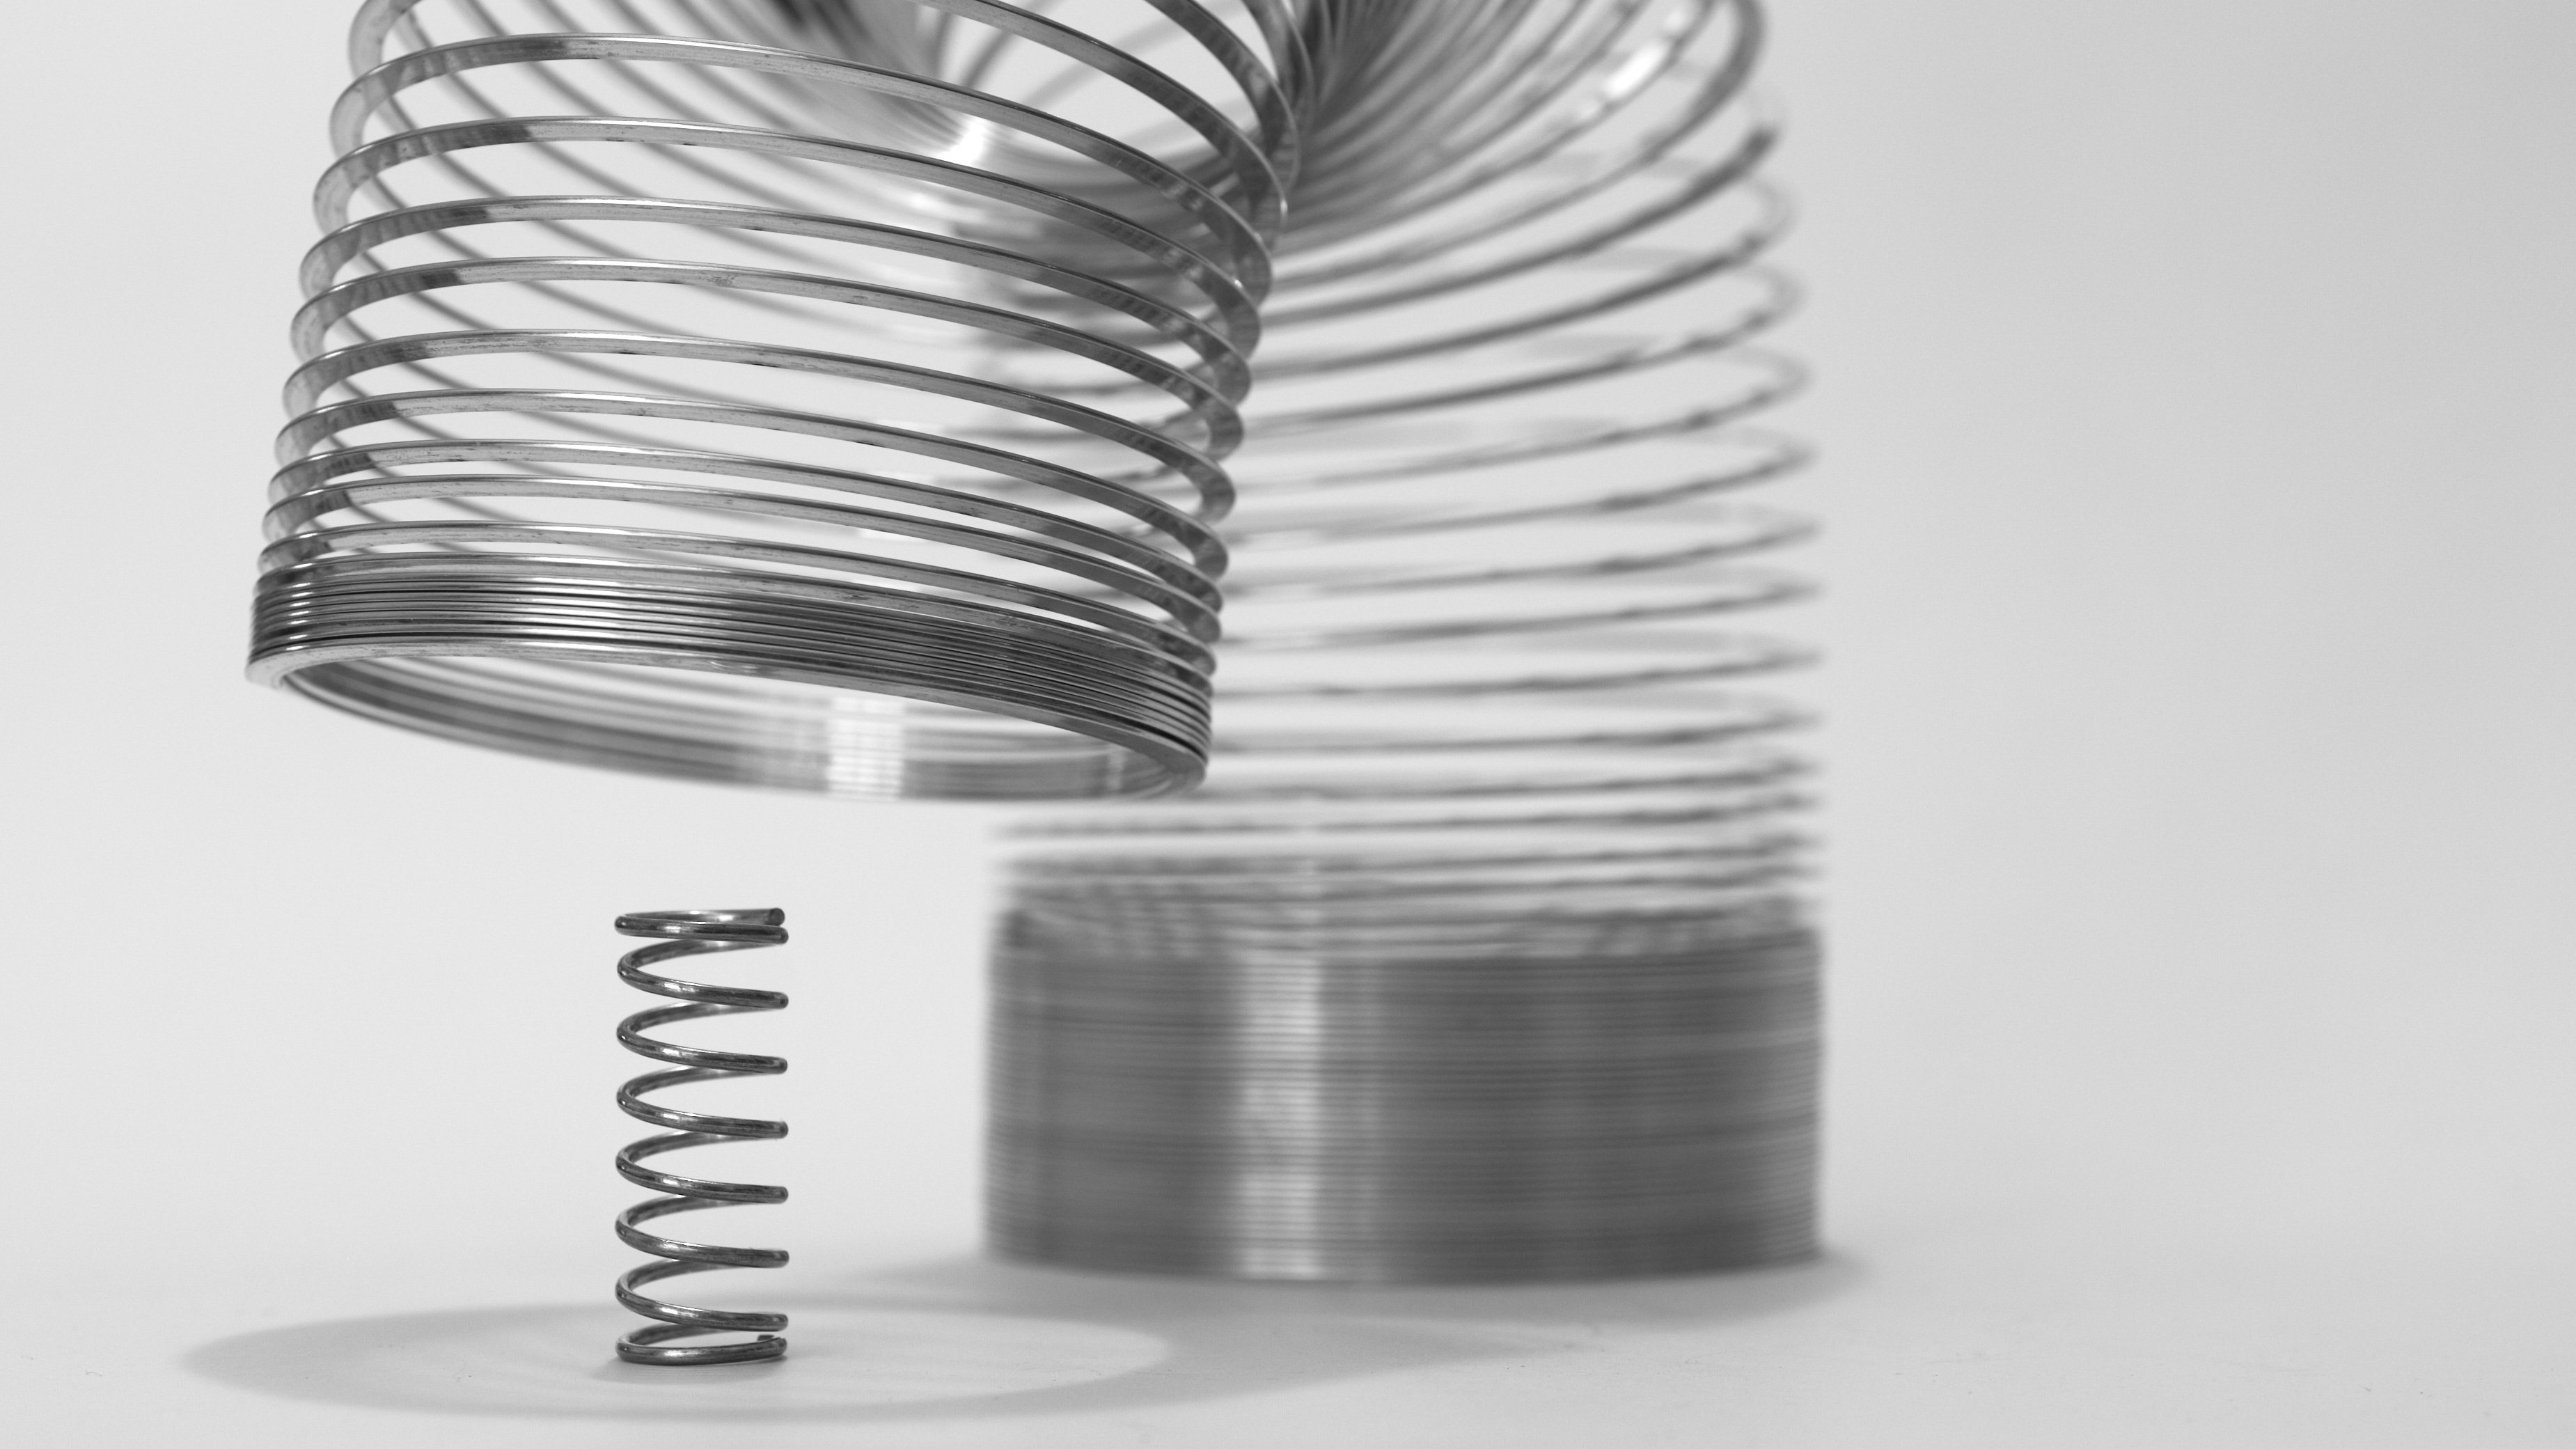 spring slinky competition overtake crush absorb